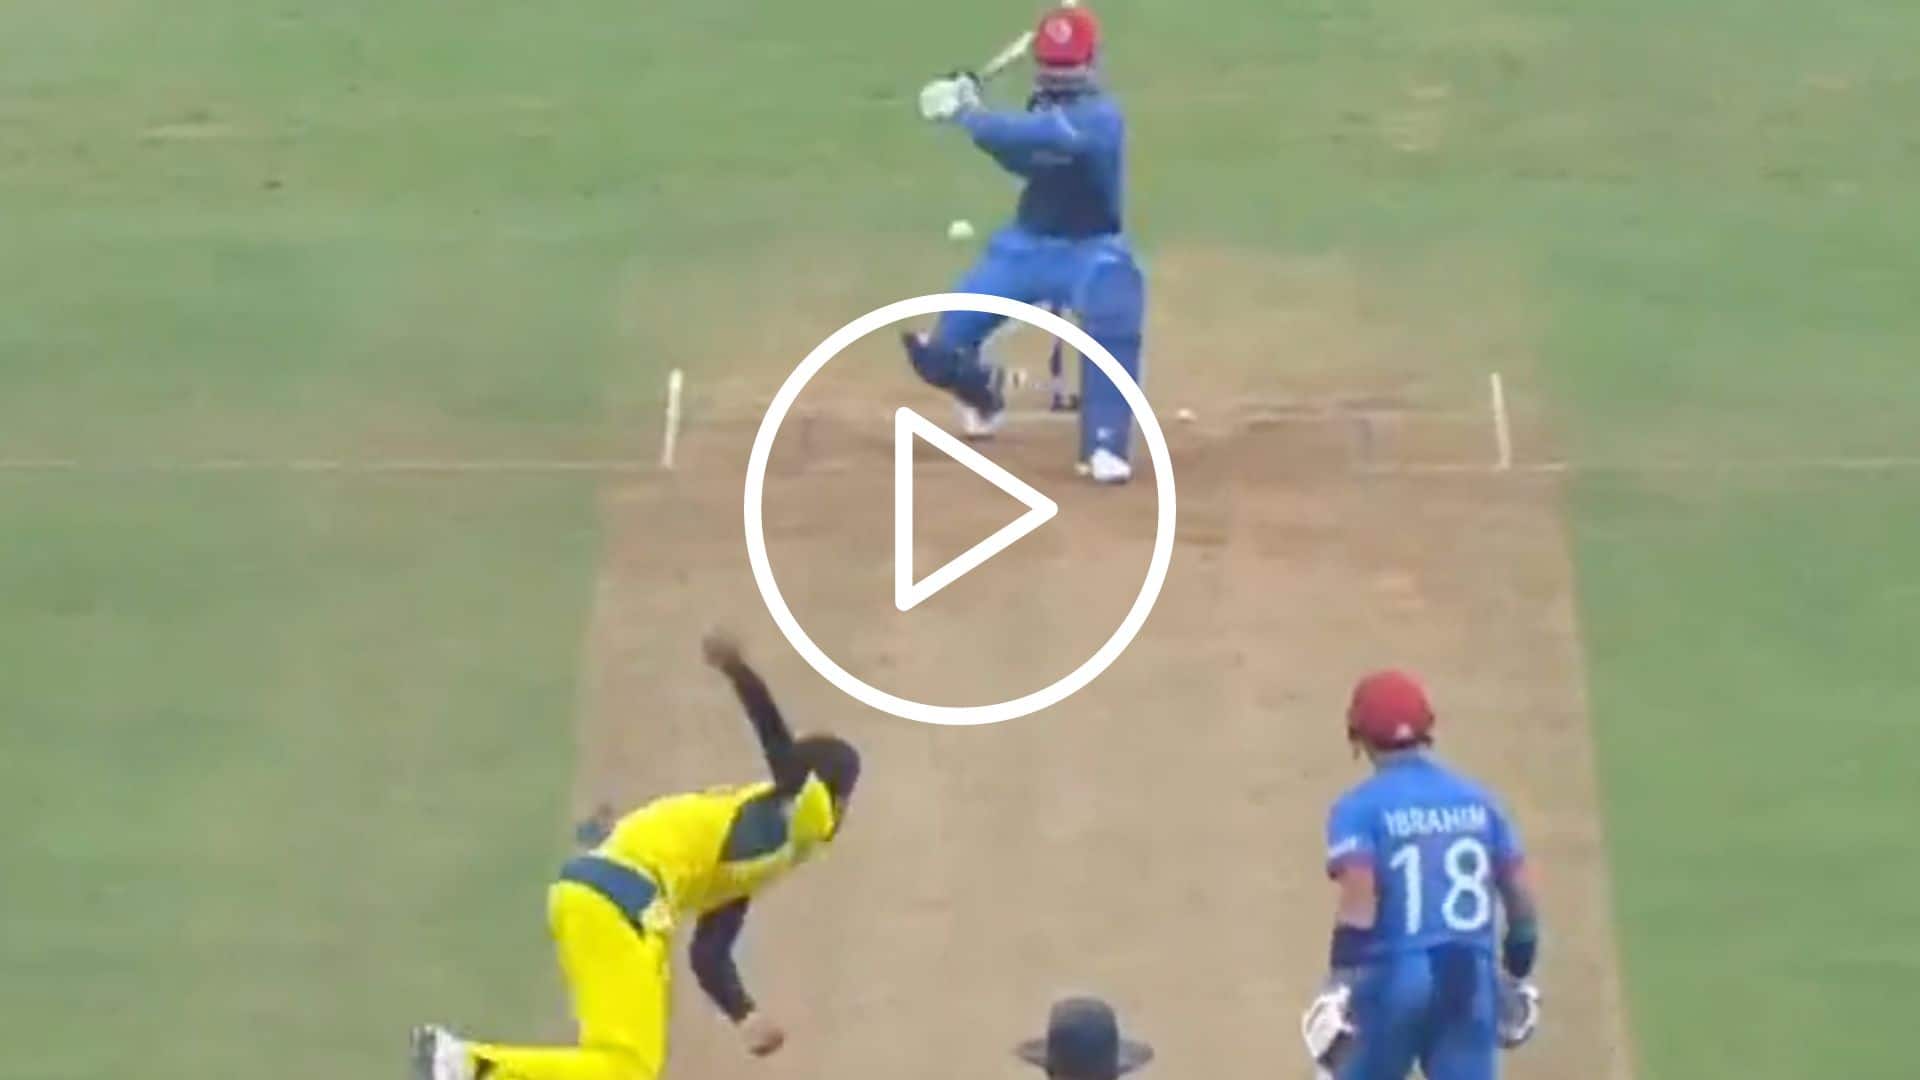 [Watch] Rashid Khan Slams Massive Sixes Against Mitchell Starc In The Last Over vs Aus